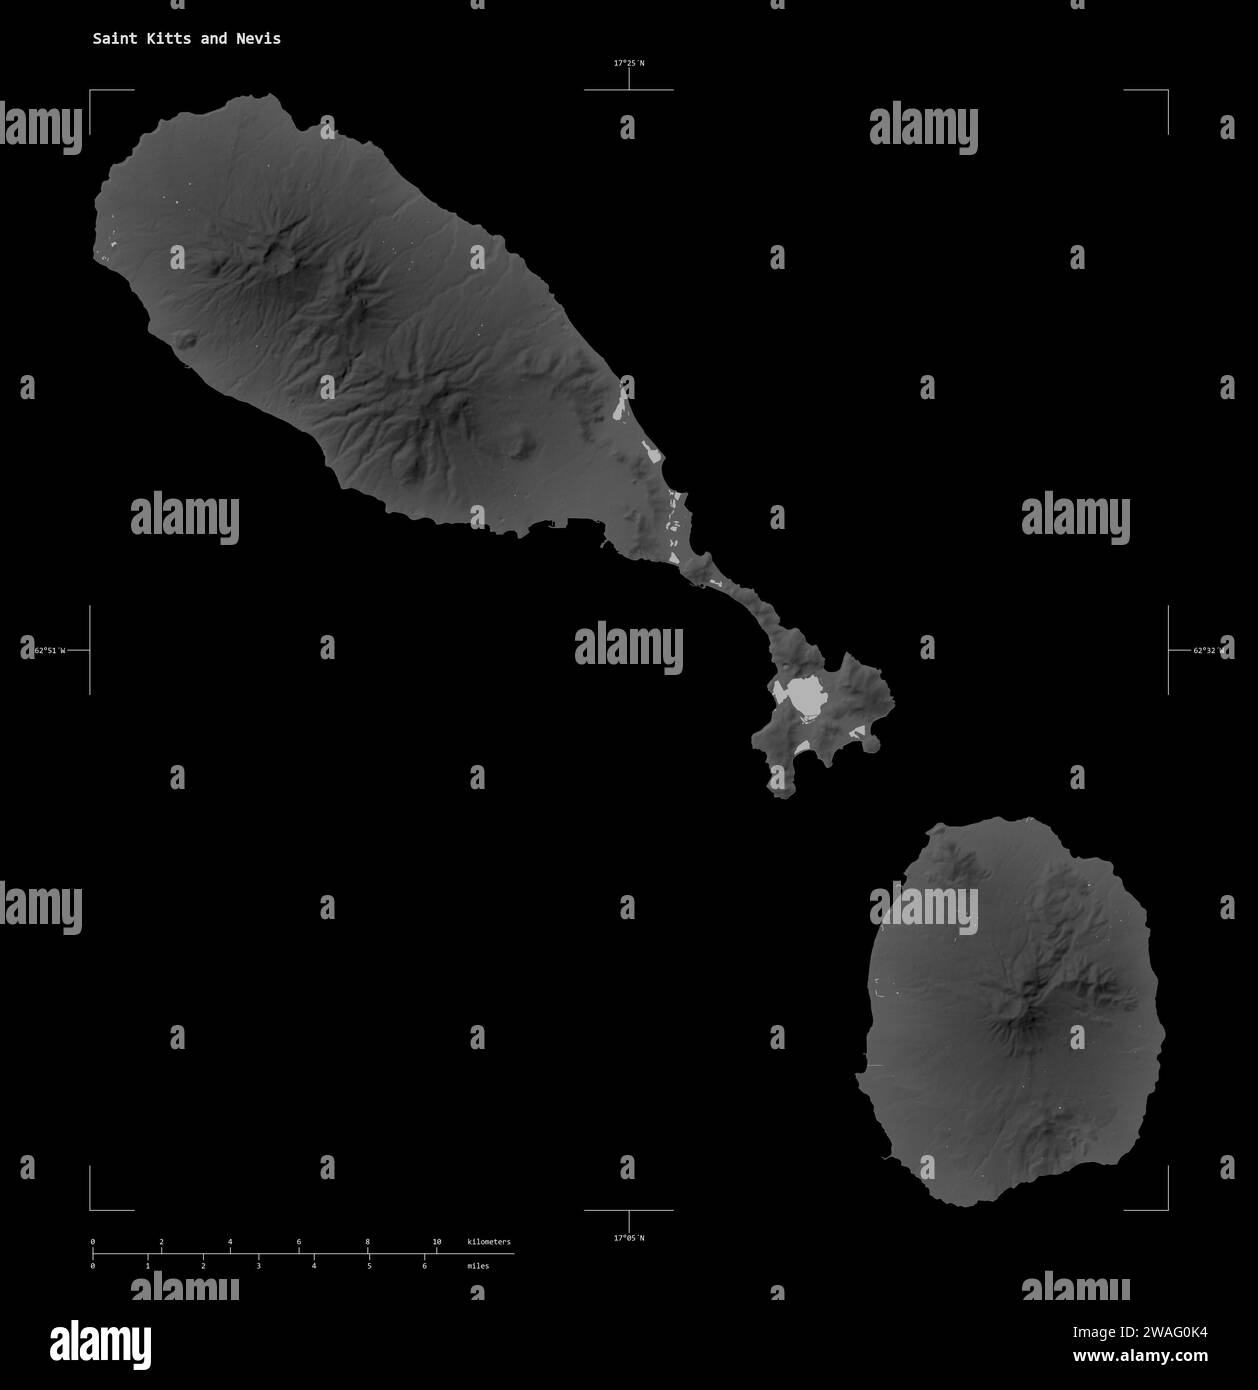 Shape of a Grayscale elevation map with lakes and rivers of the Saint Kitts and Nevis, with distance scale and map border coordinates, isolated on bla Stock Photo